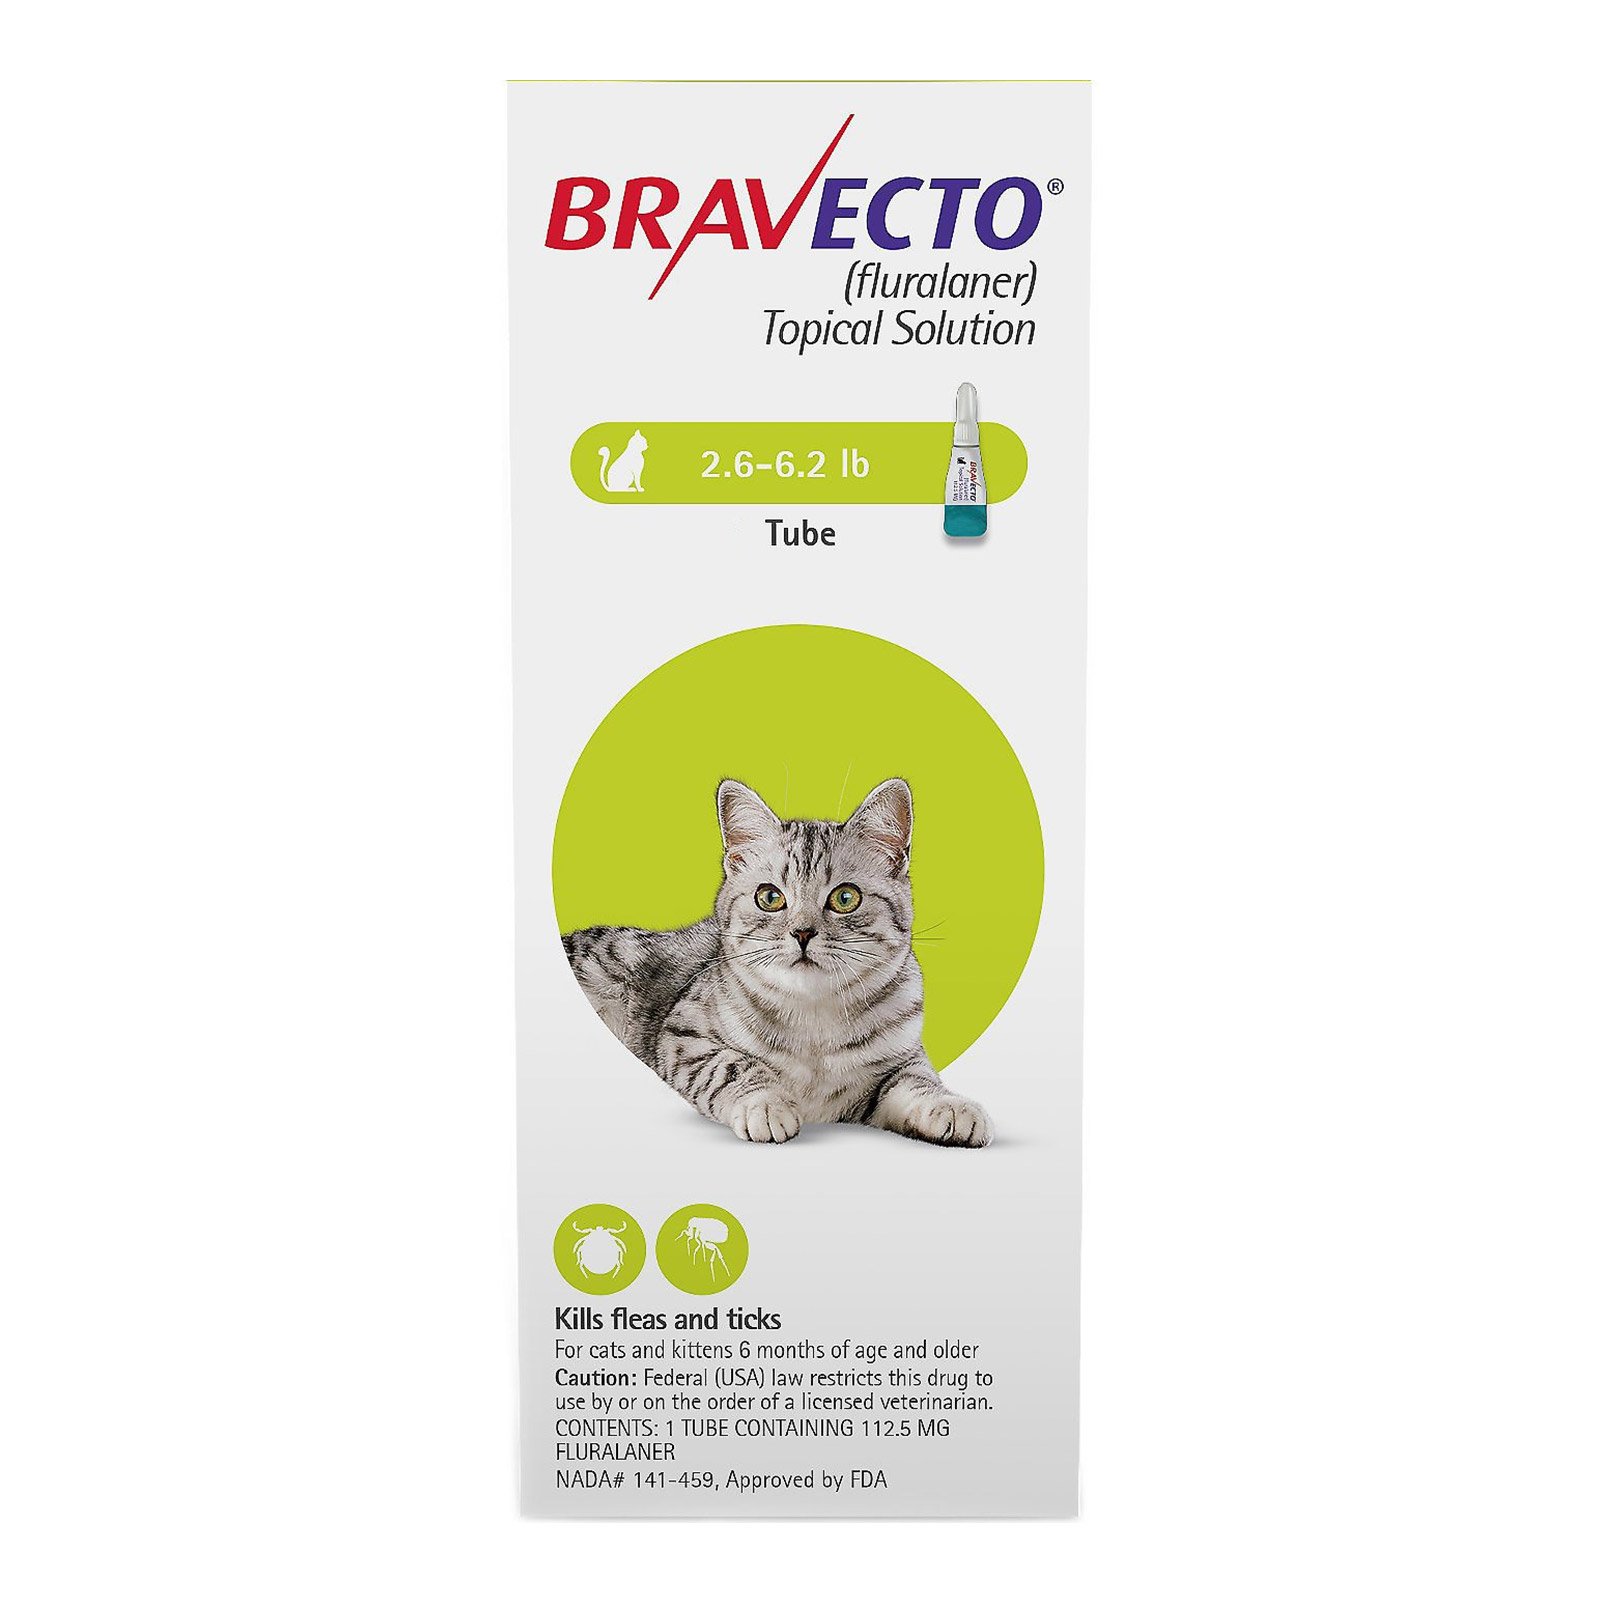 Bravecto Spot On for Cats